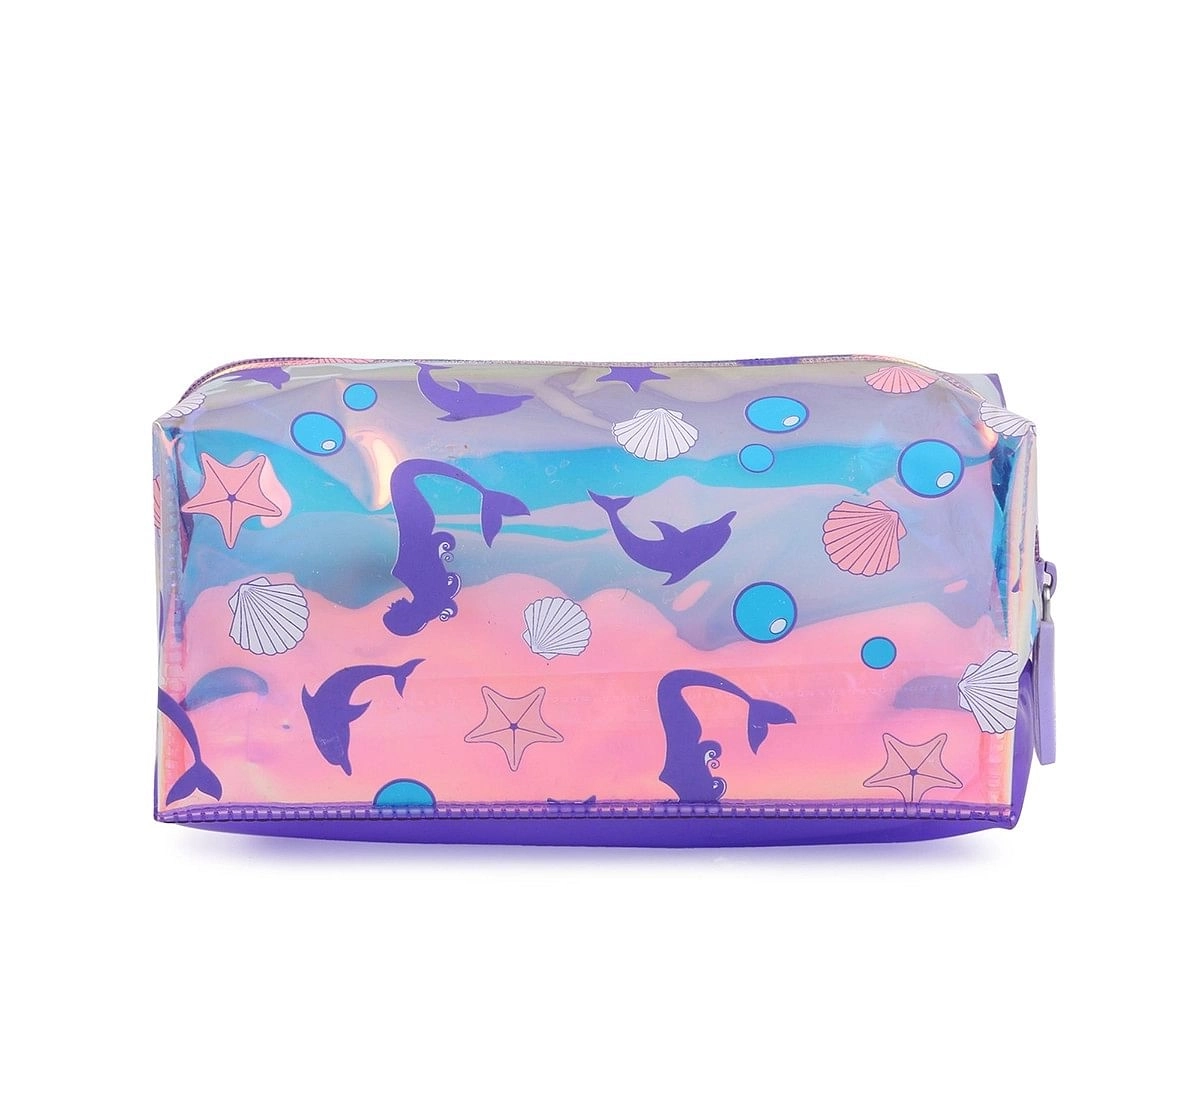 Hamster London Rectangular Mermaid Pouch for age 3Y+ (Purple)